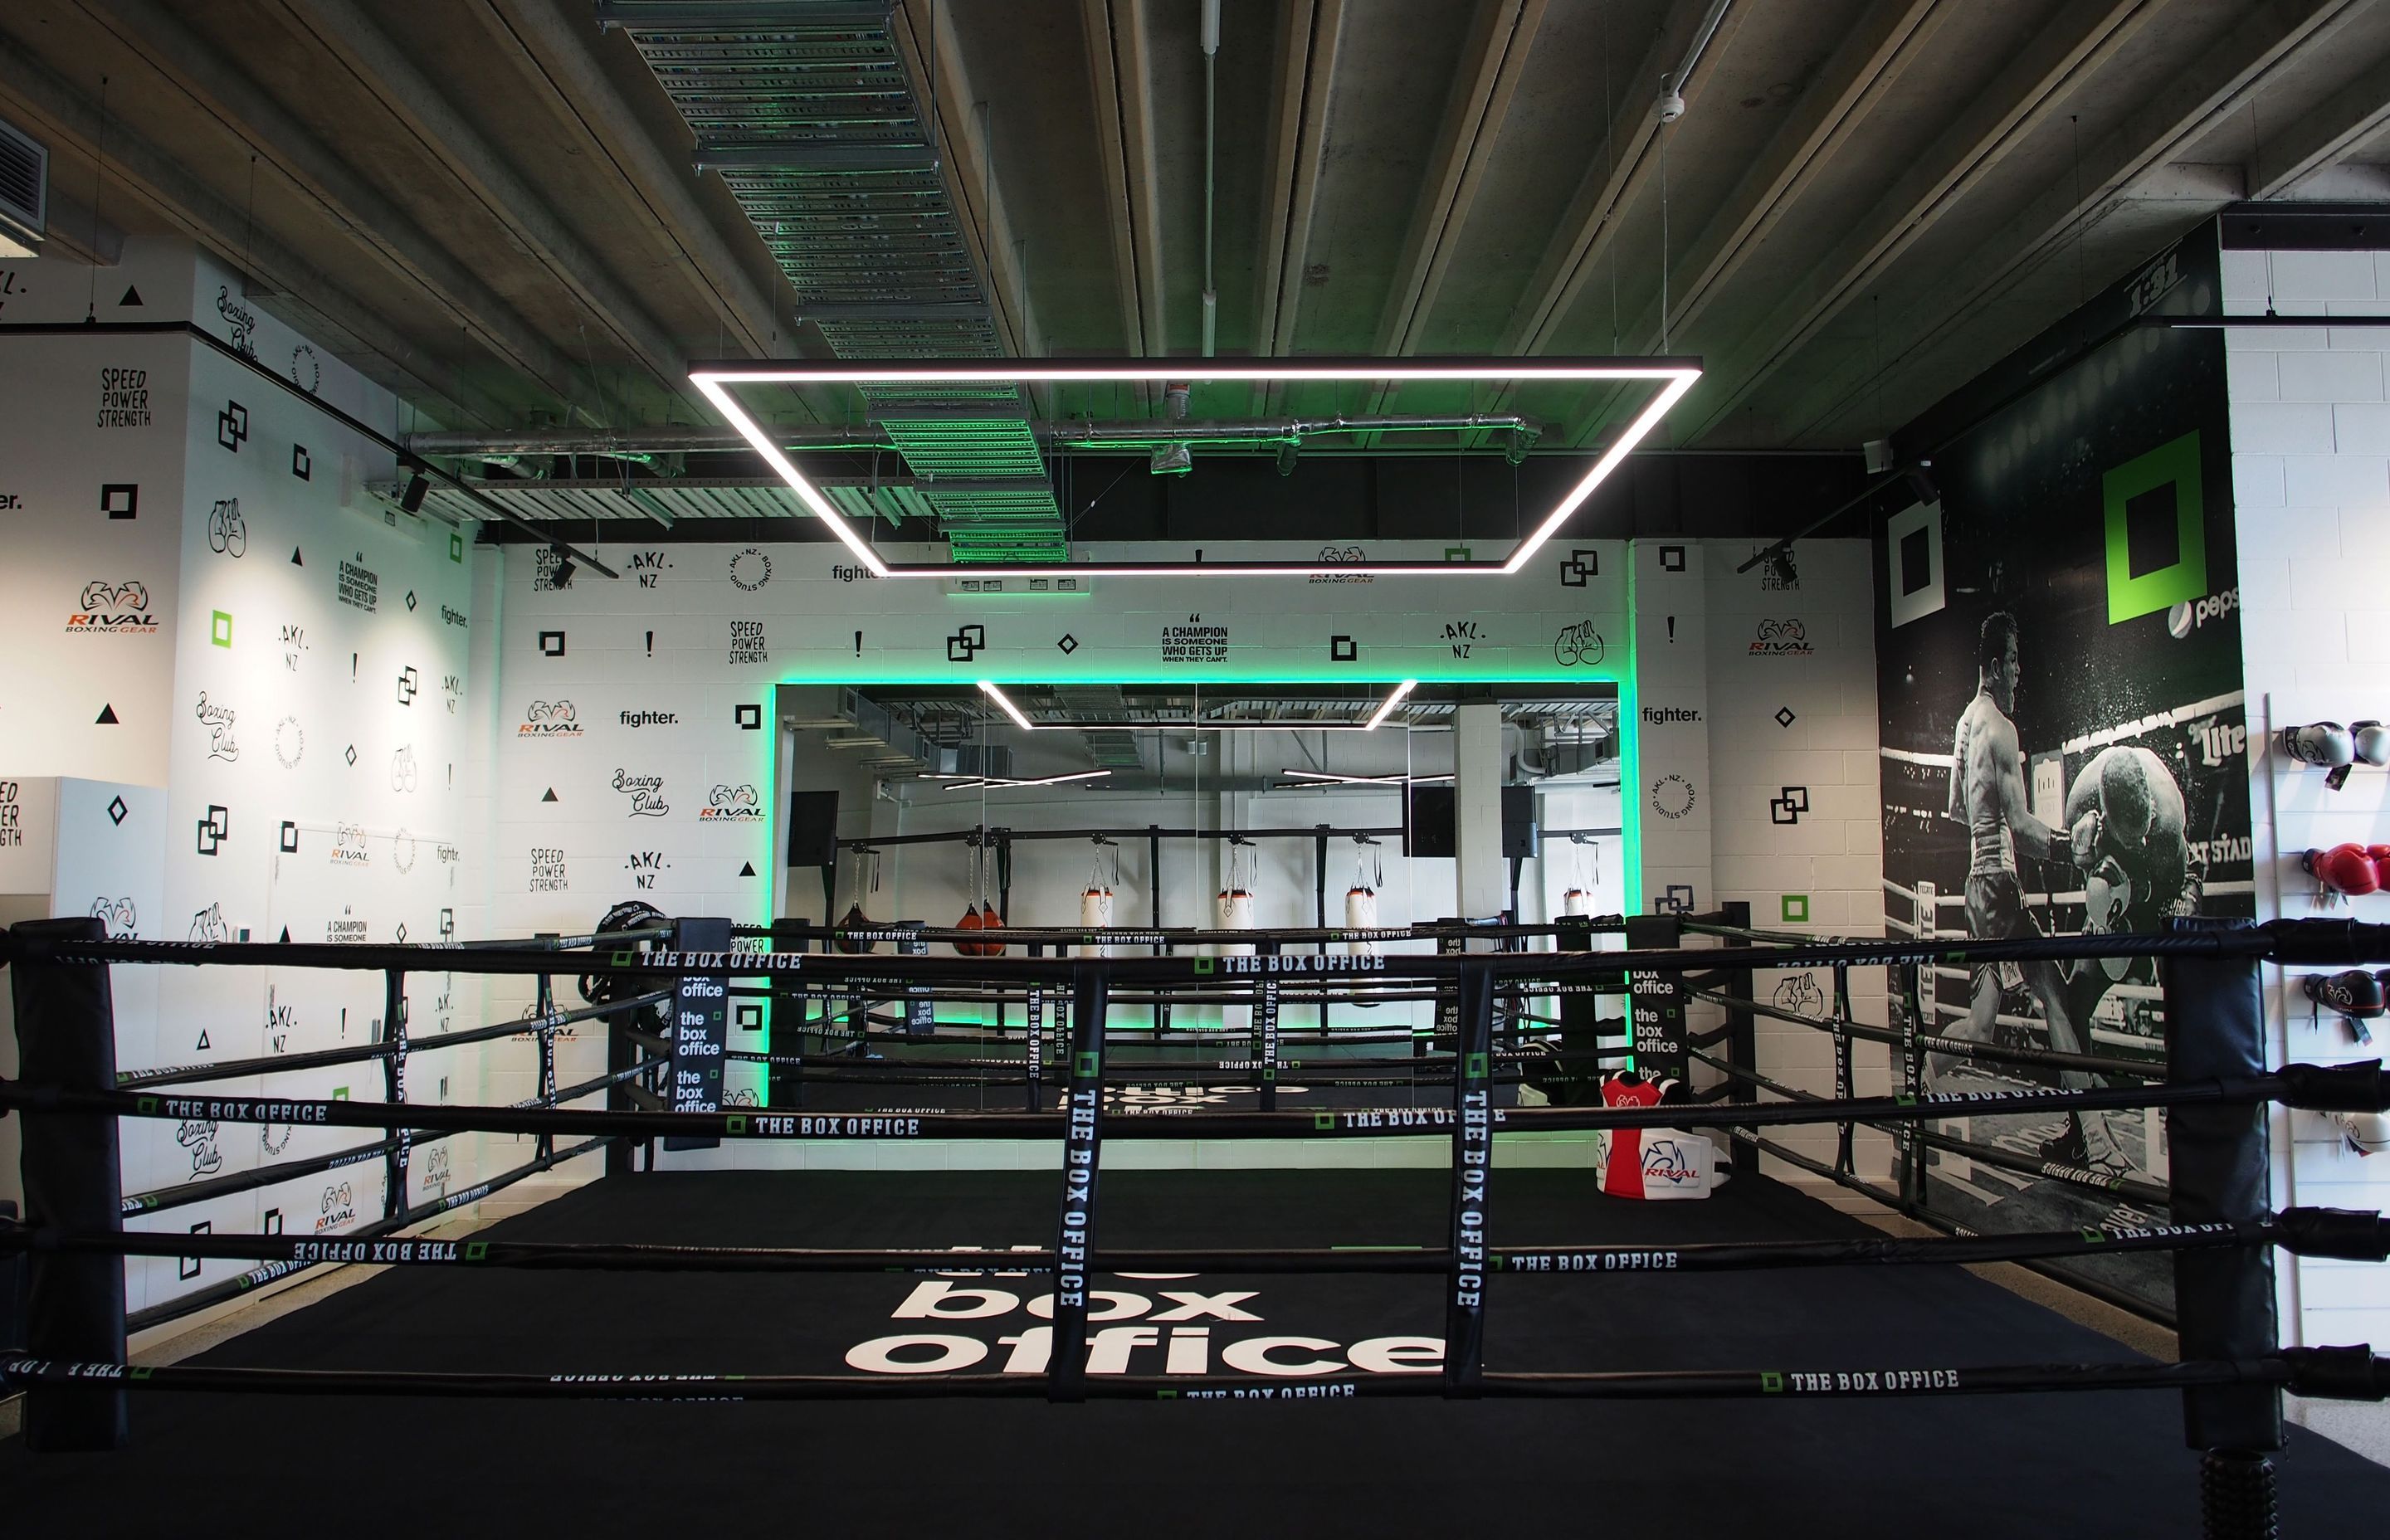 The custom square pendant takes centre stage over the boxing ring.